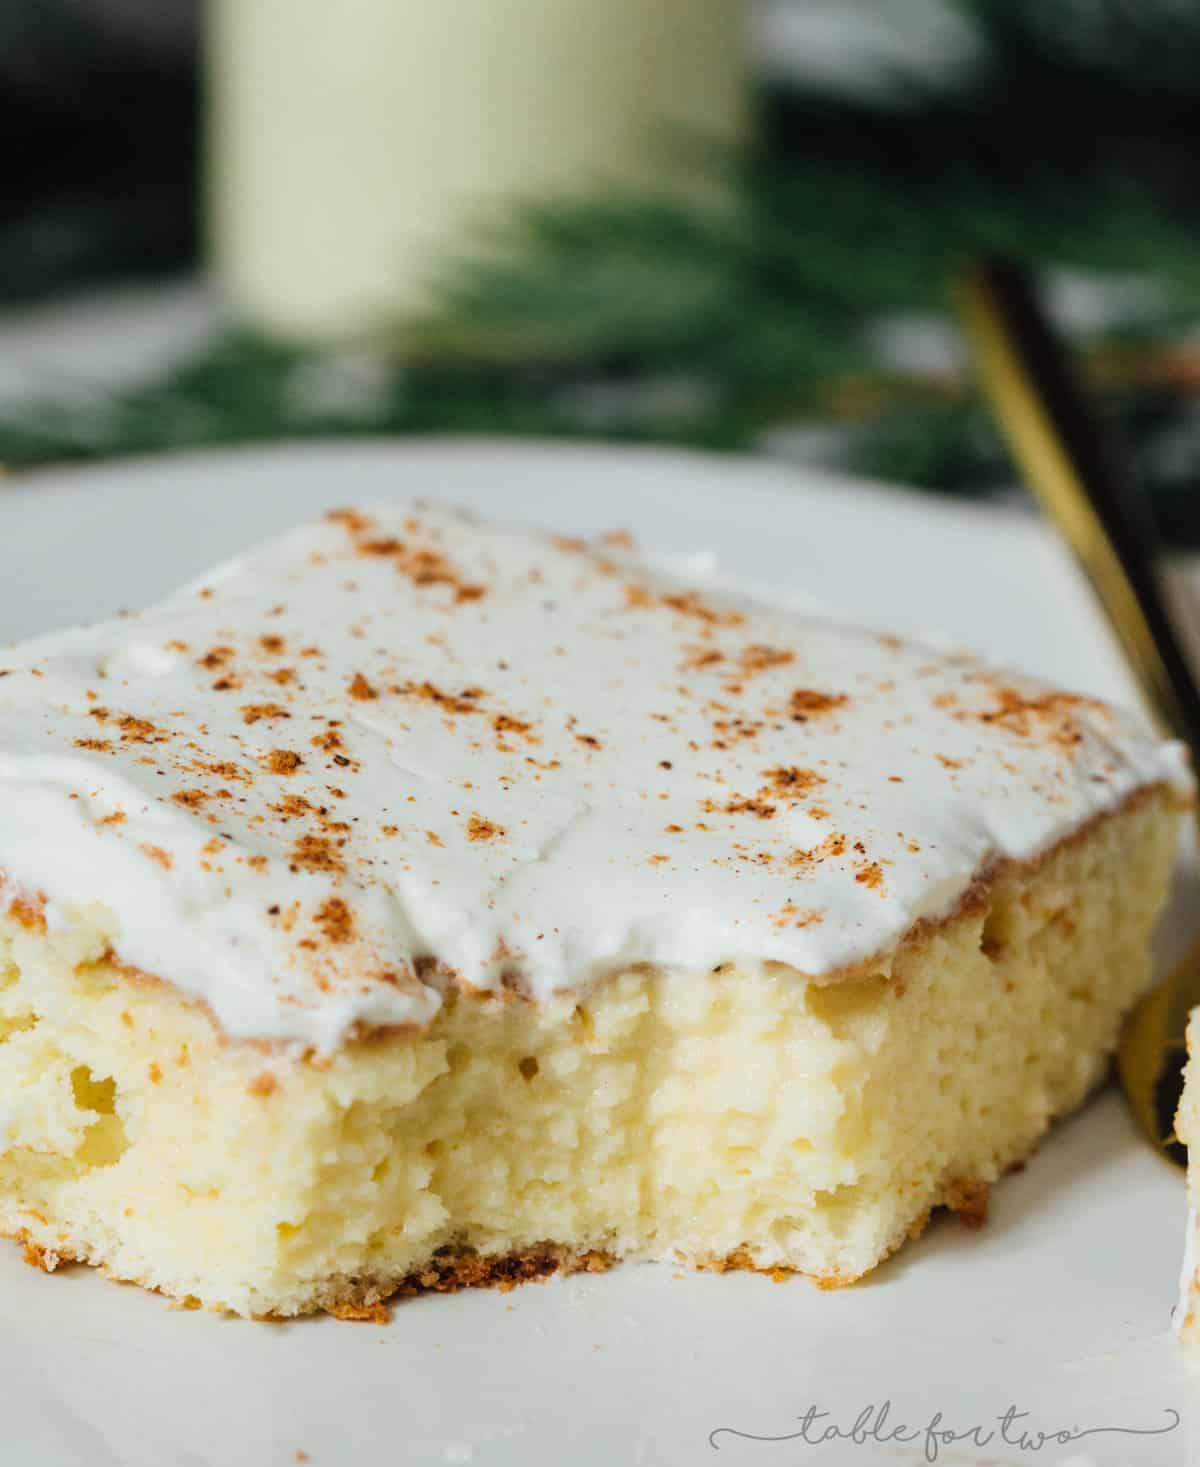 Slice of eggnog tres leches cake with whipped topping and nutmeg sprinkled on top. In the photo, the cake slice has a corner taken out to show the moist center.